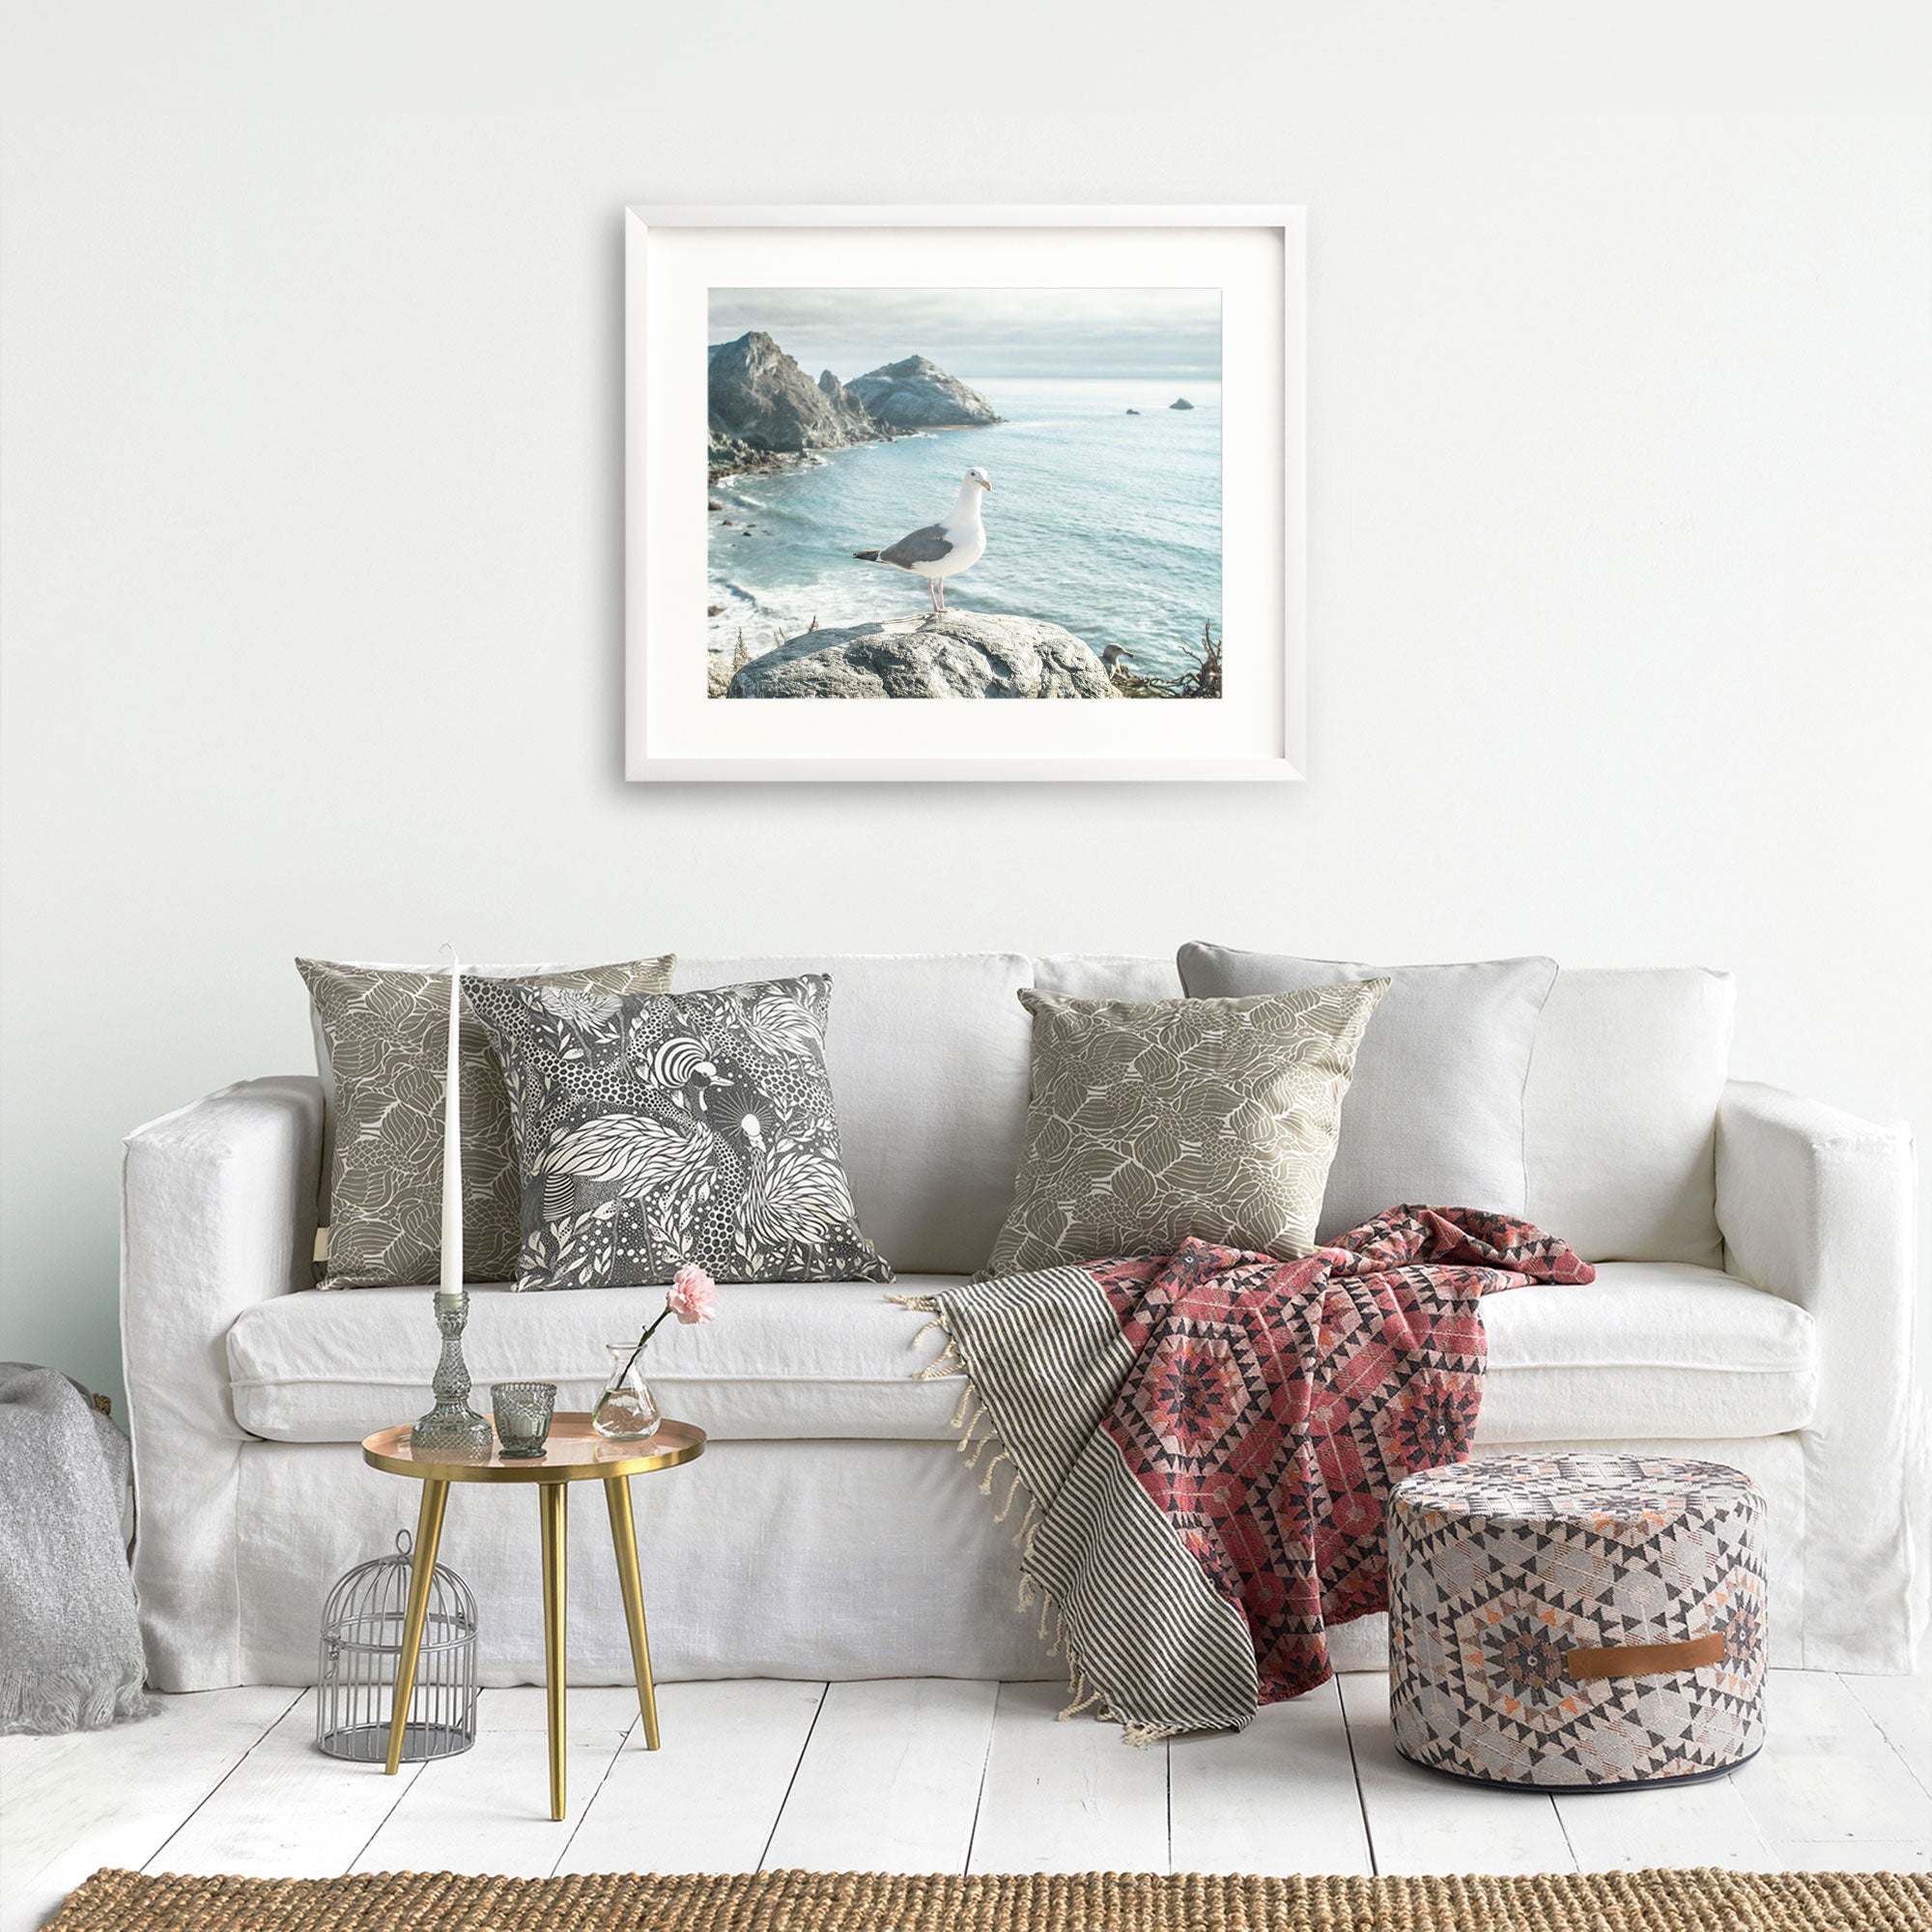 A cozy living room with a white sofa adorned with patterned cushions, a red and gray throw blanket, a small round table with books and flowers, and a framed Offley Green Big Sur Landscape Print photograph on the wall.